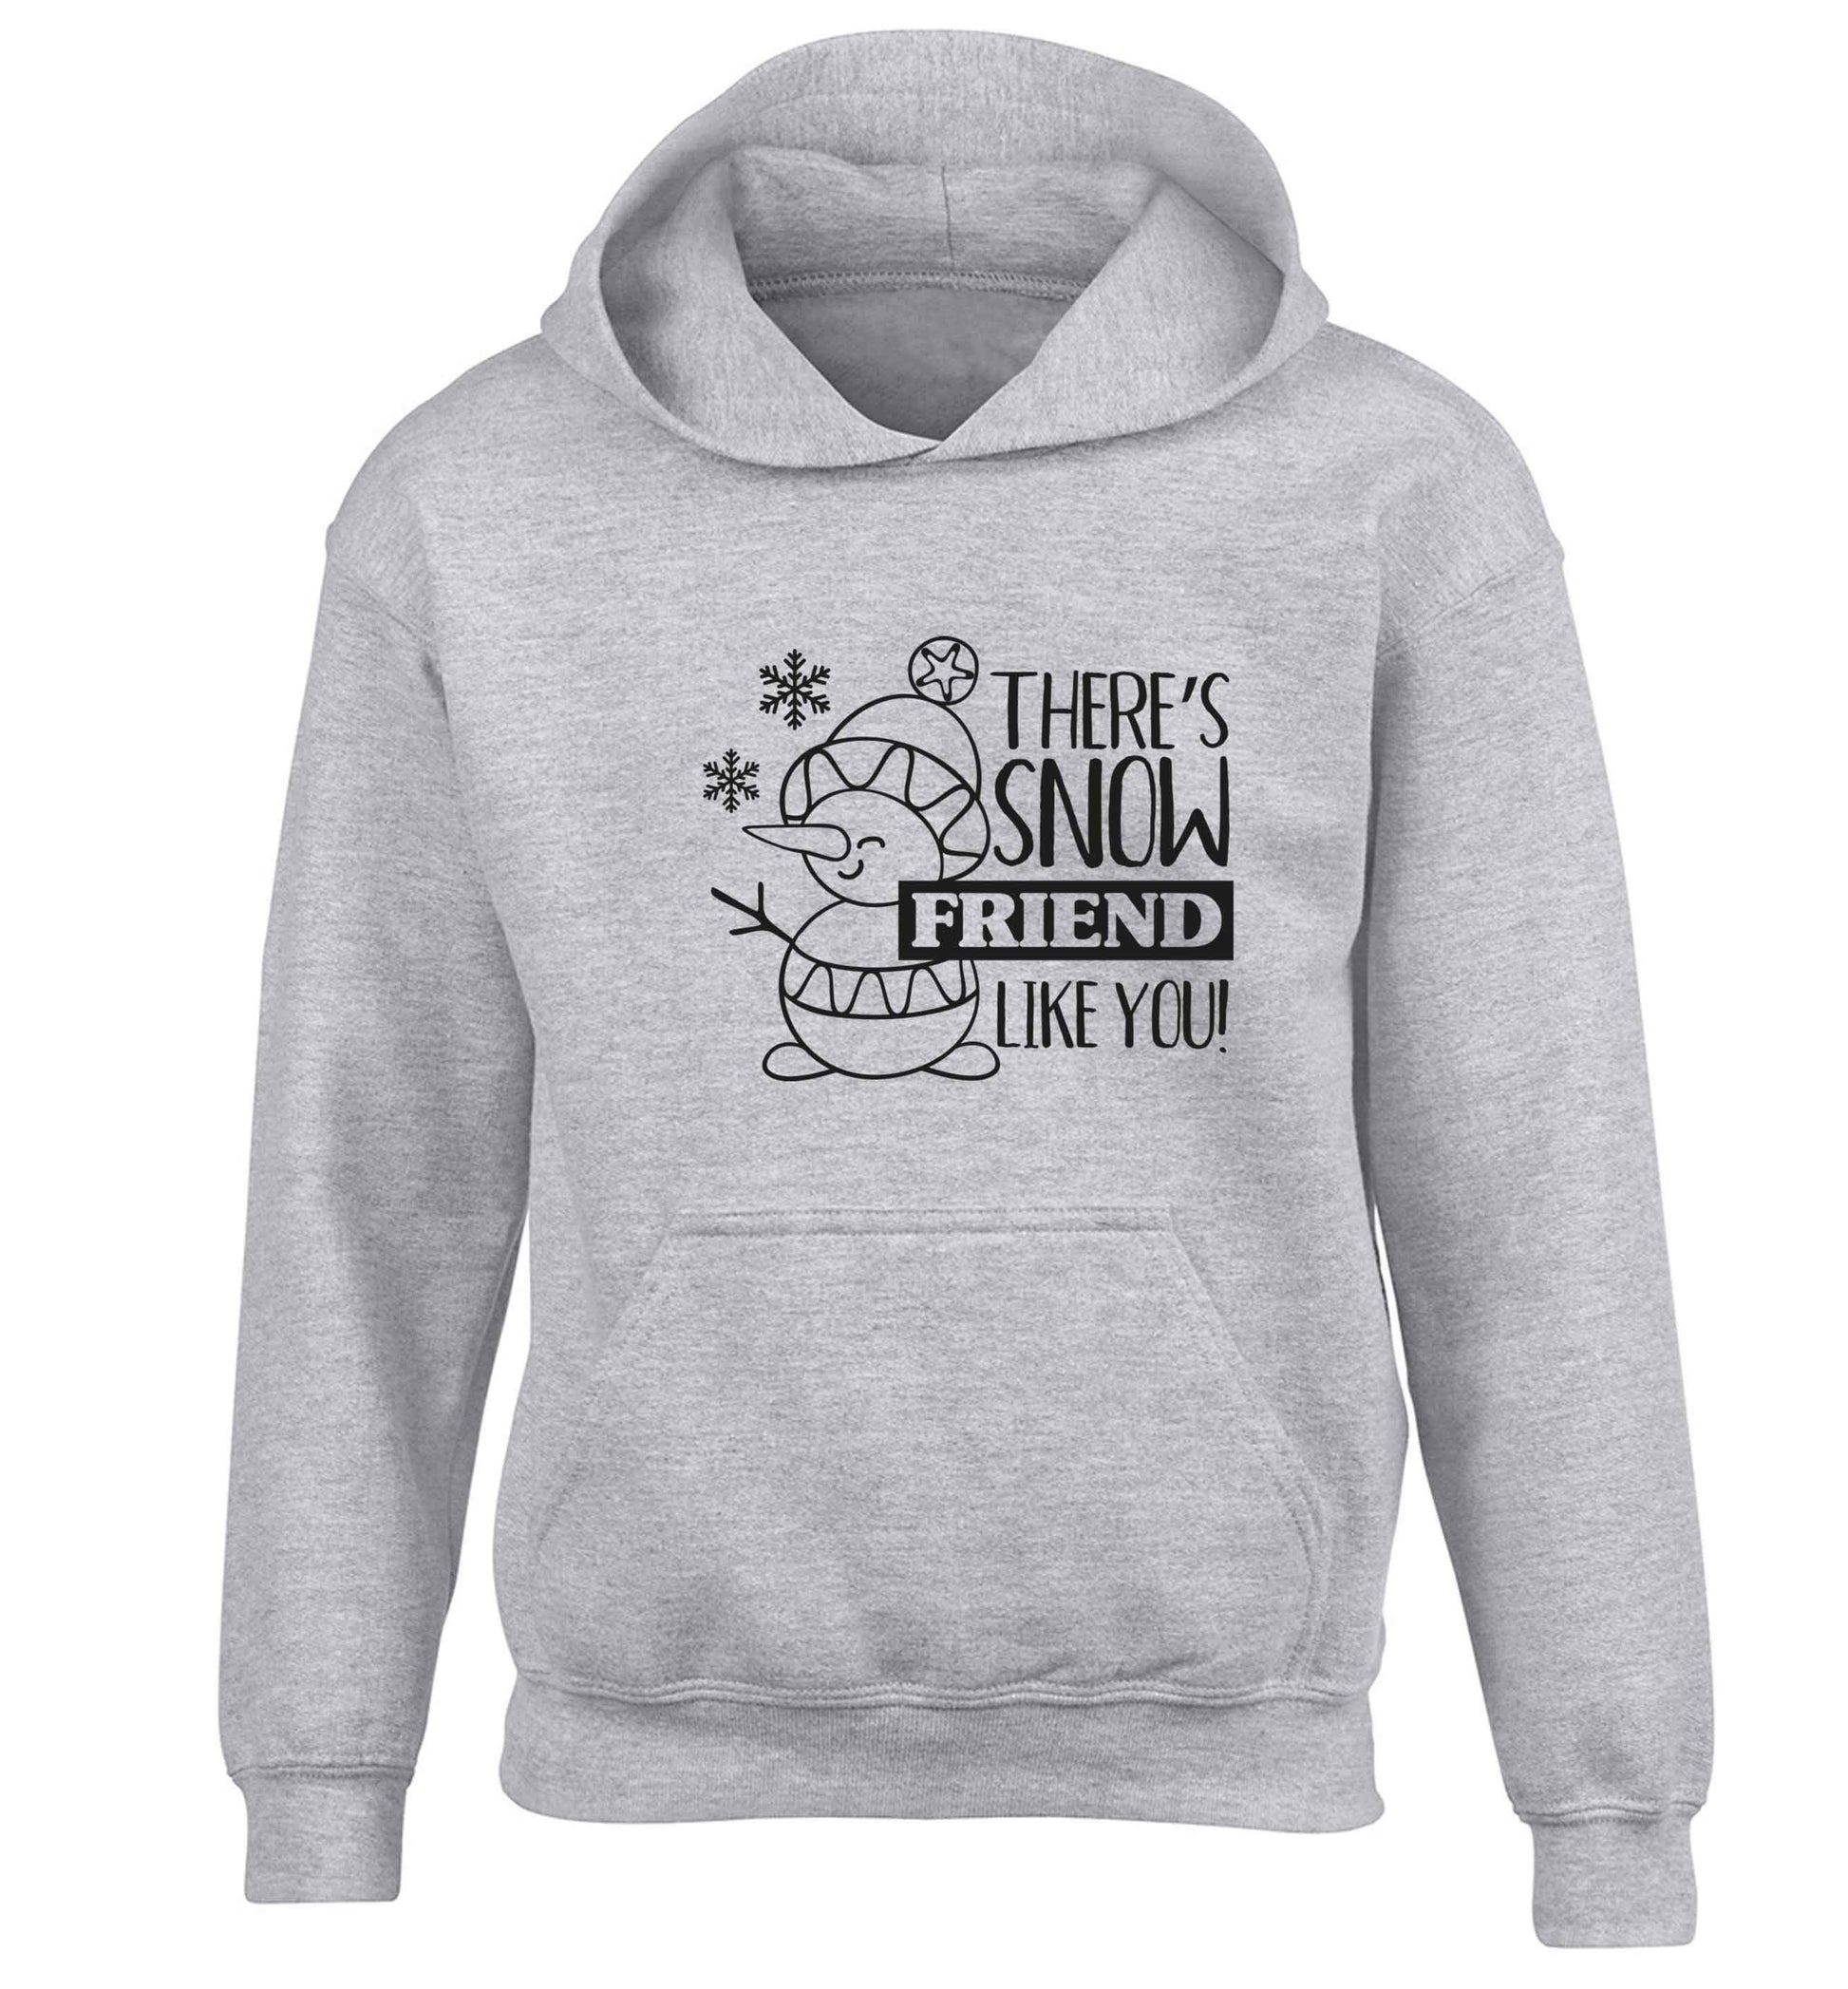 There's snow friend like you children's grey hoodie 12-13 Years